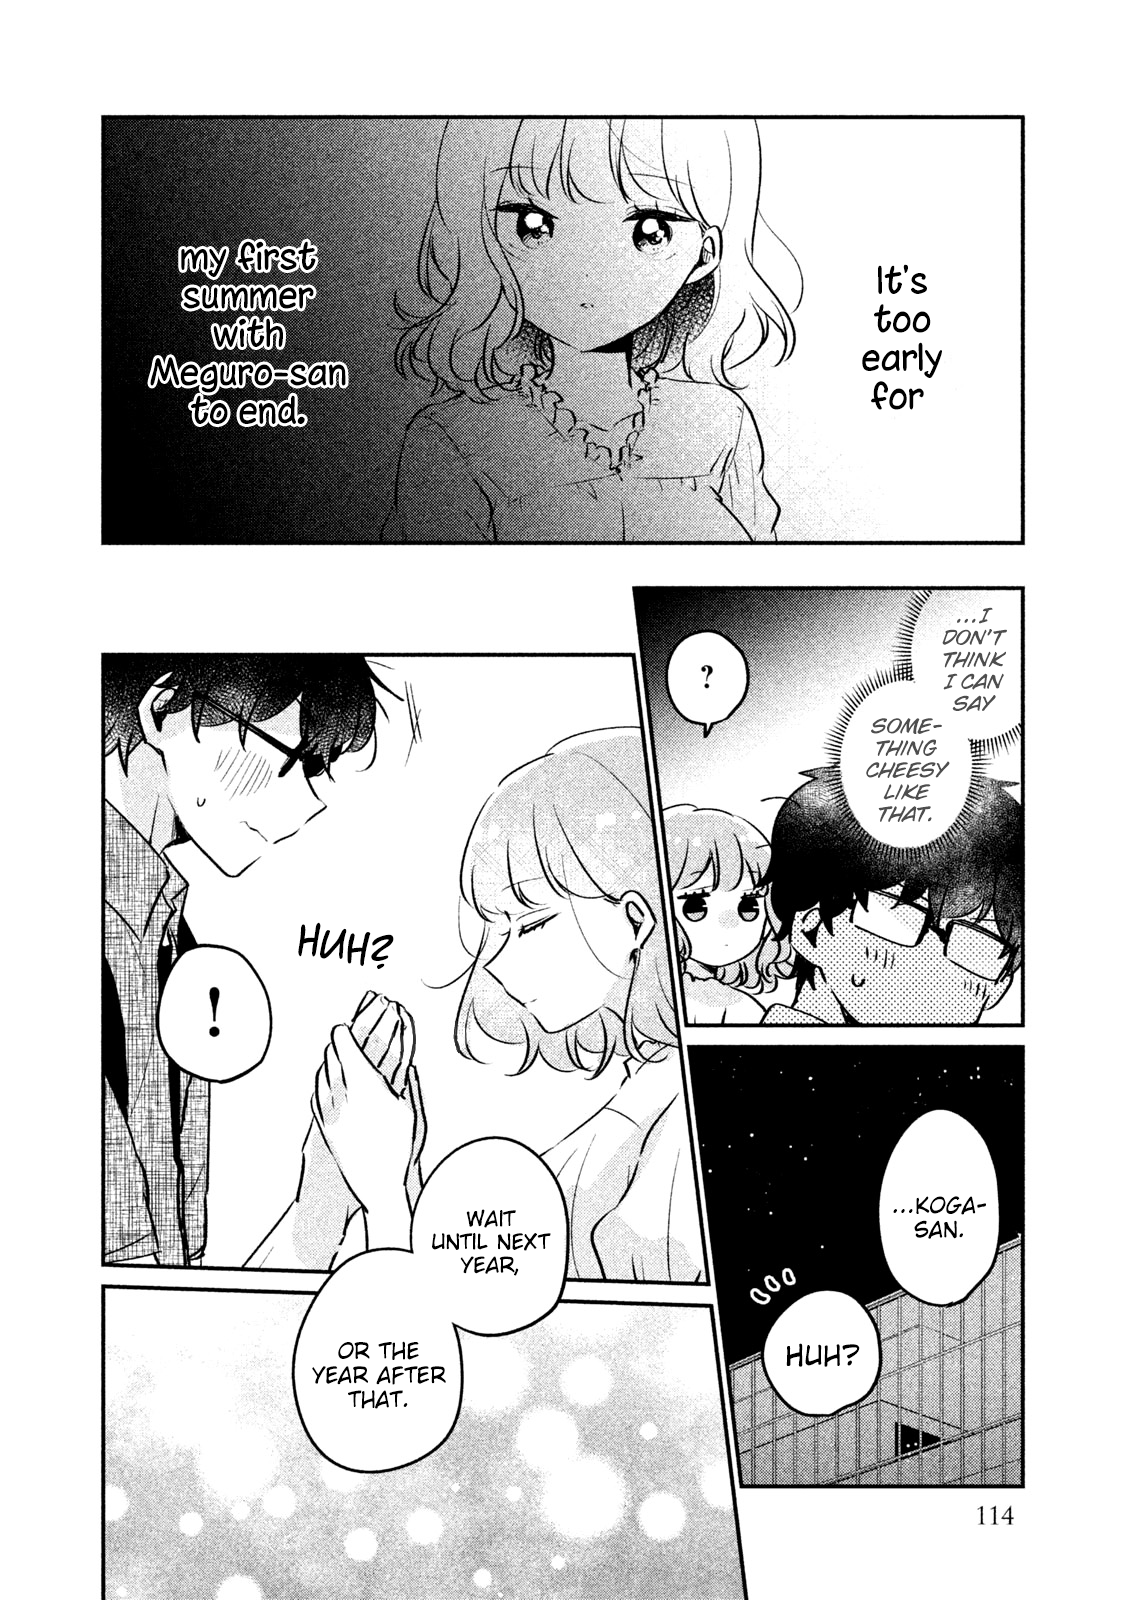 It's Not Meguro-san's First Time chapter 17 page 5